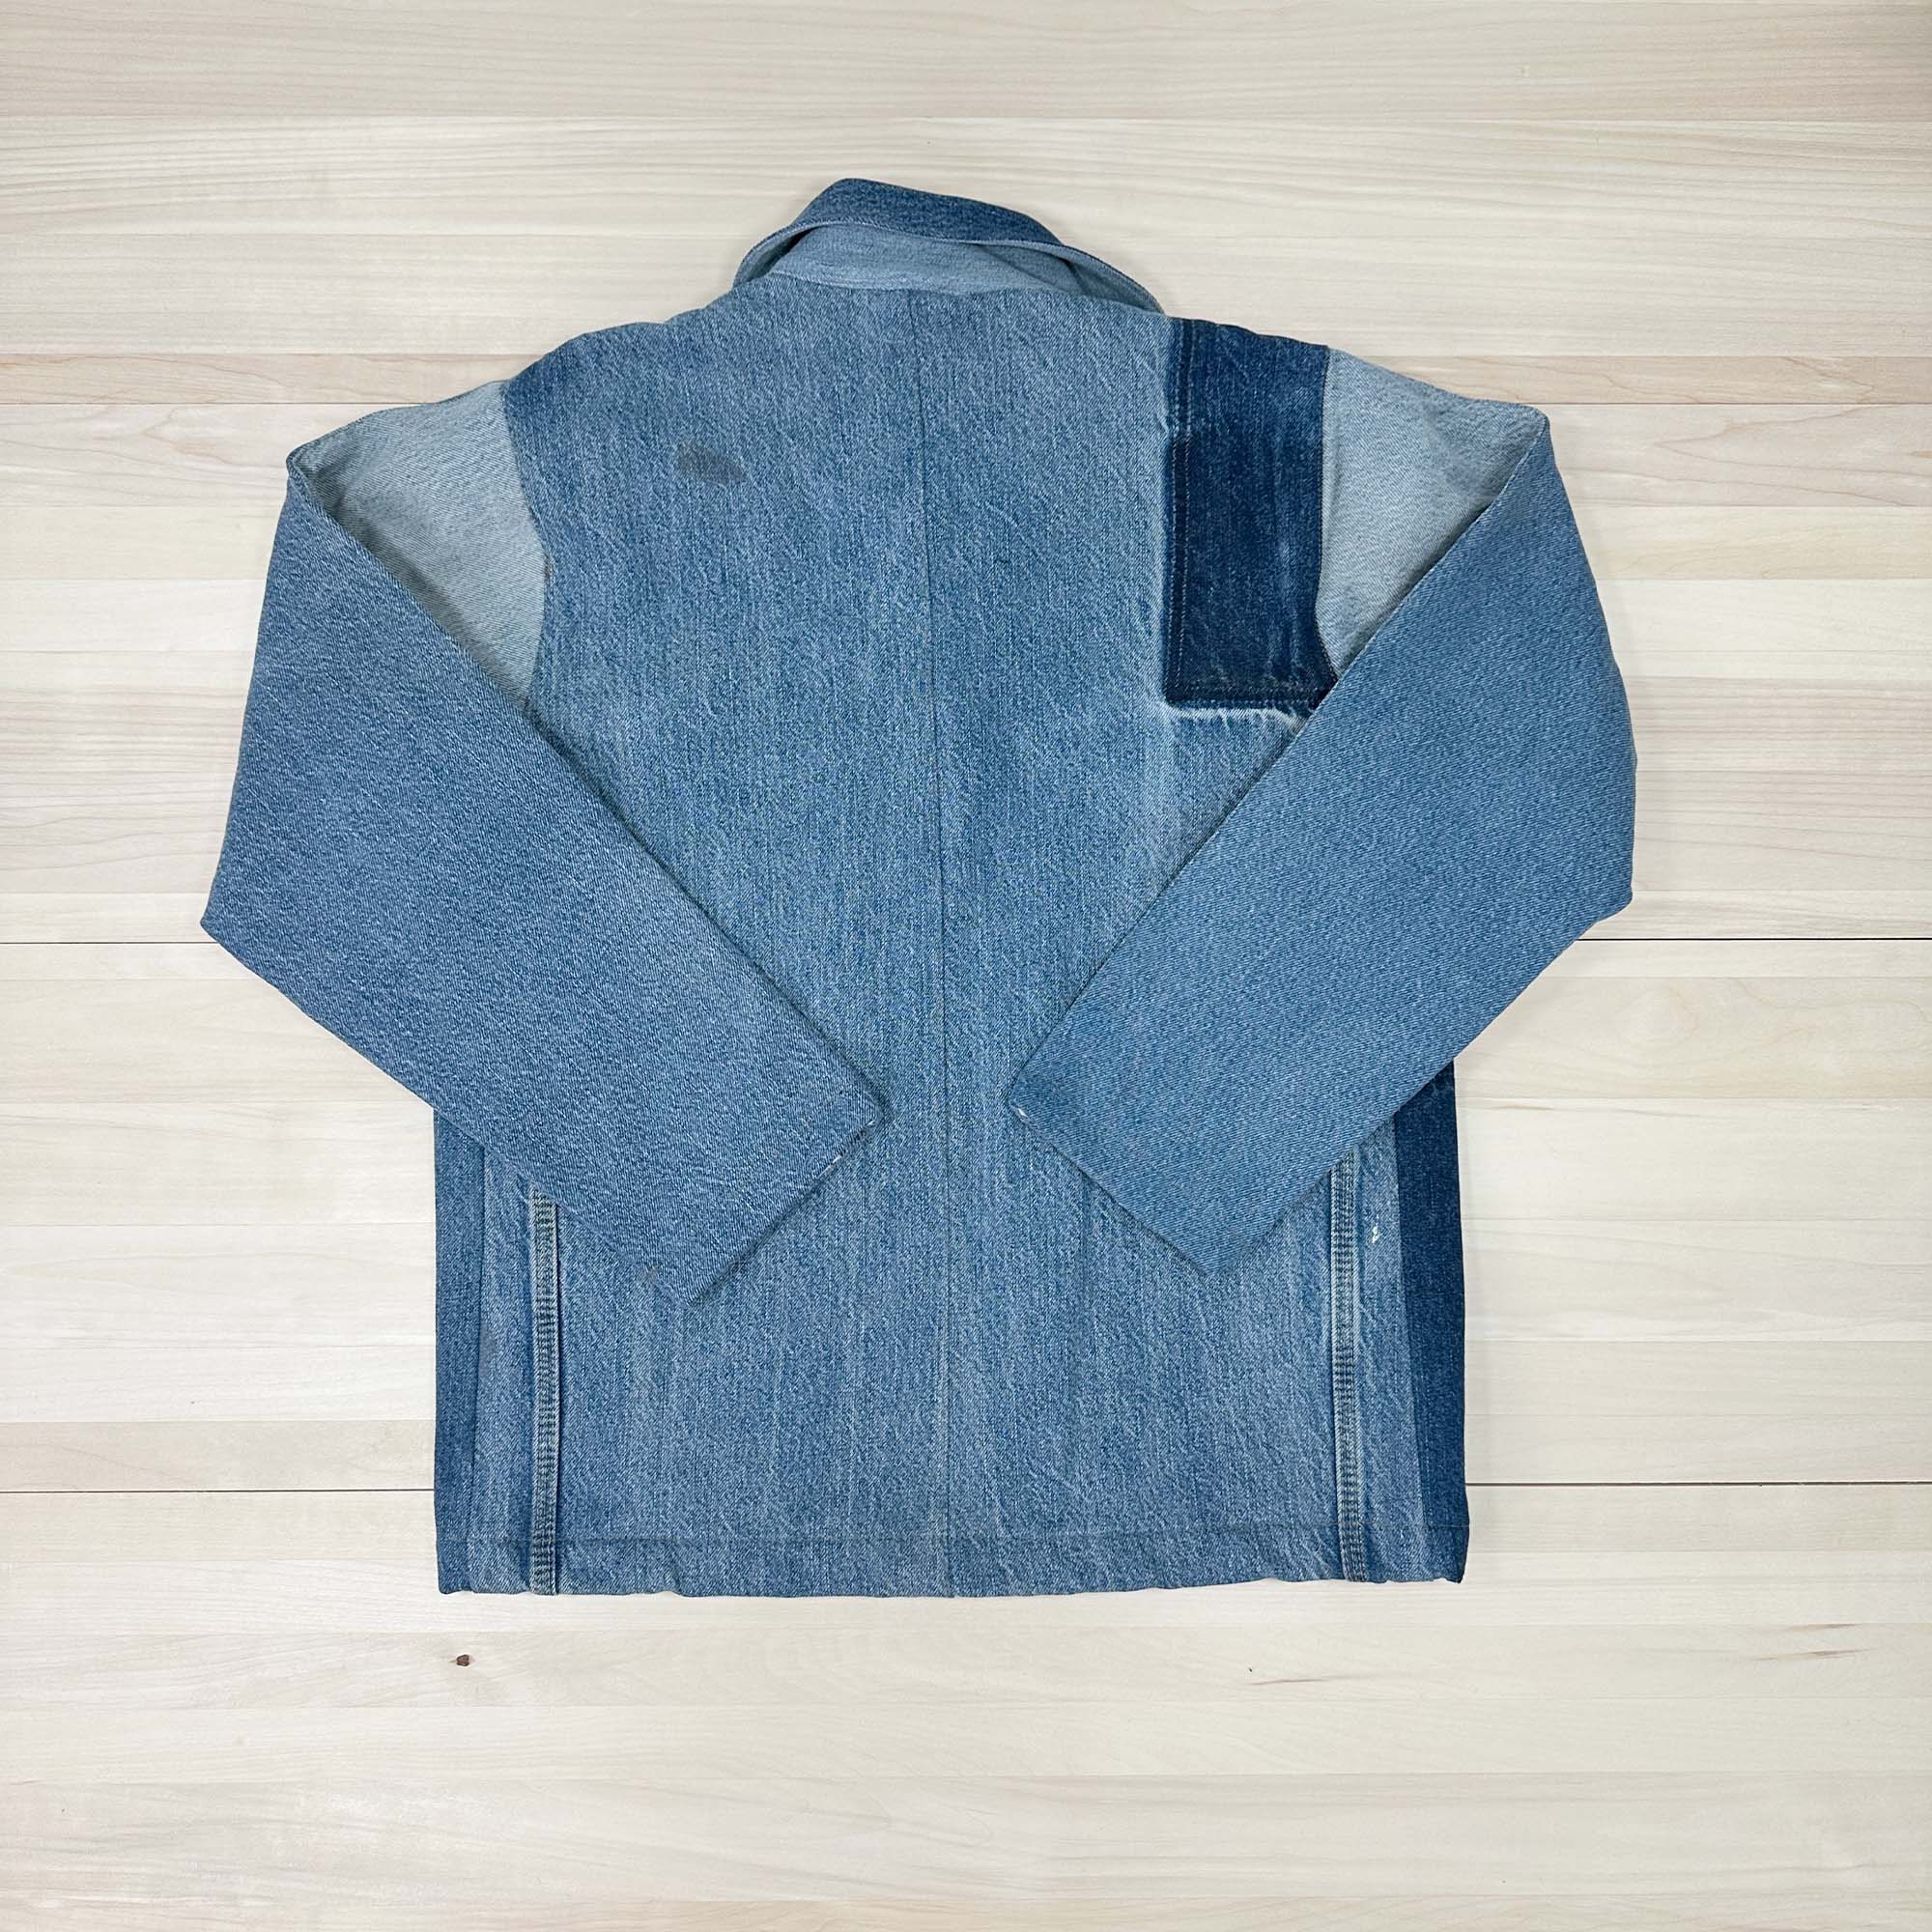 Chore Coat Made From Upcycled Dickies Jeans - Medium-5